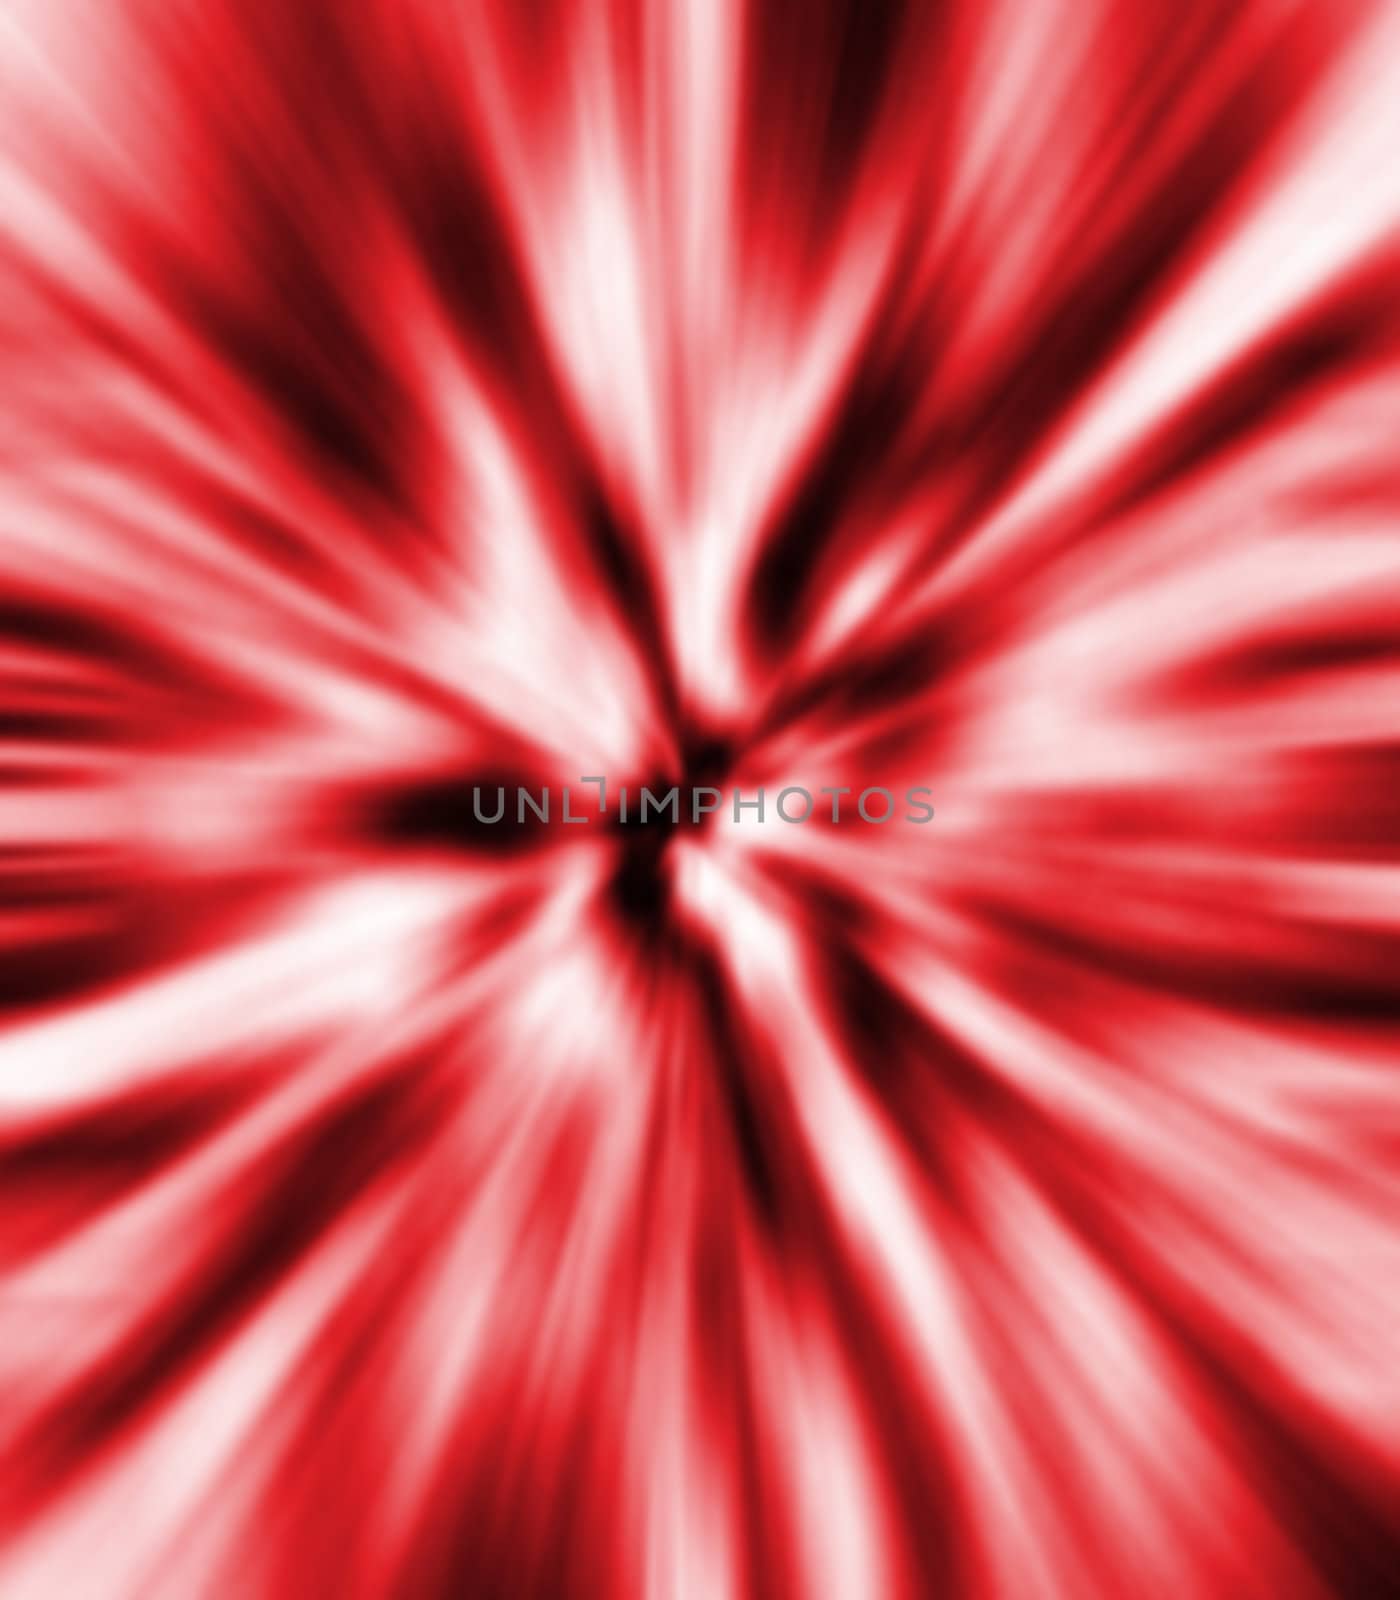 red zoom blur by graficallyminded